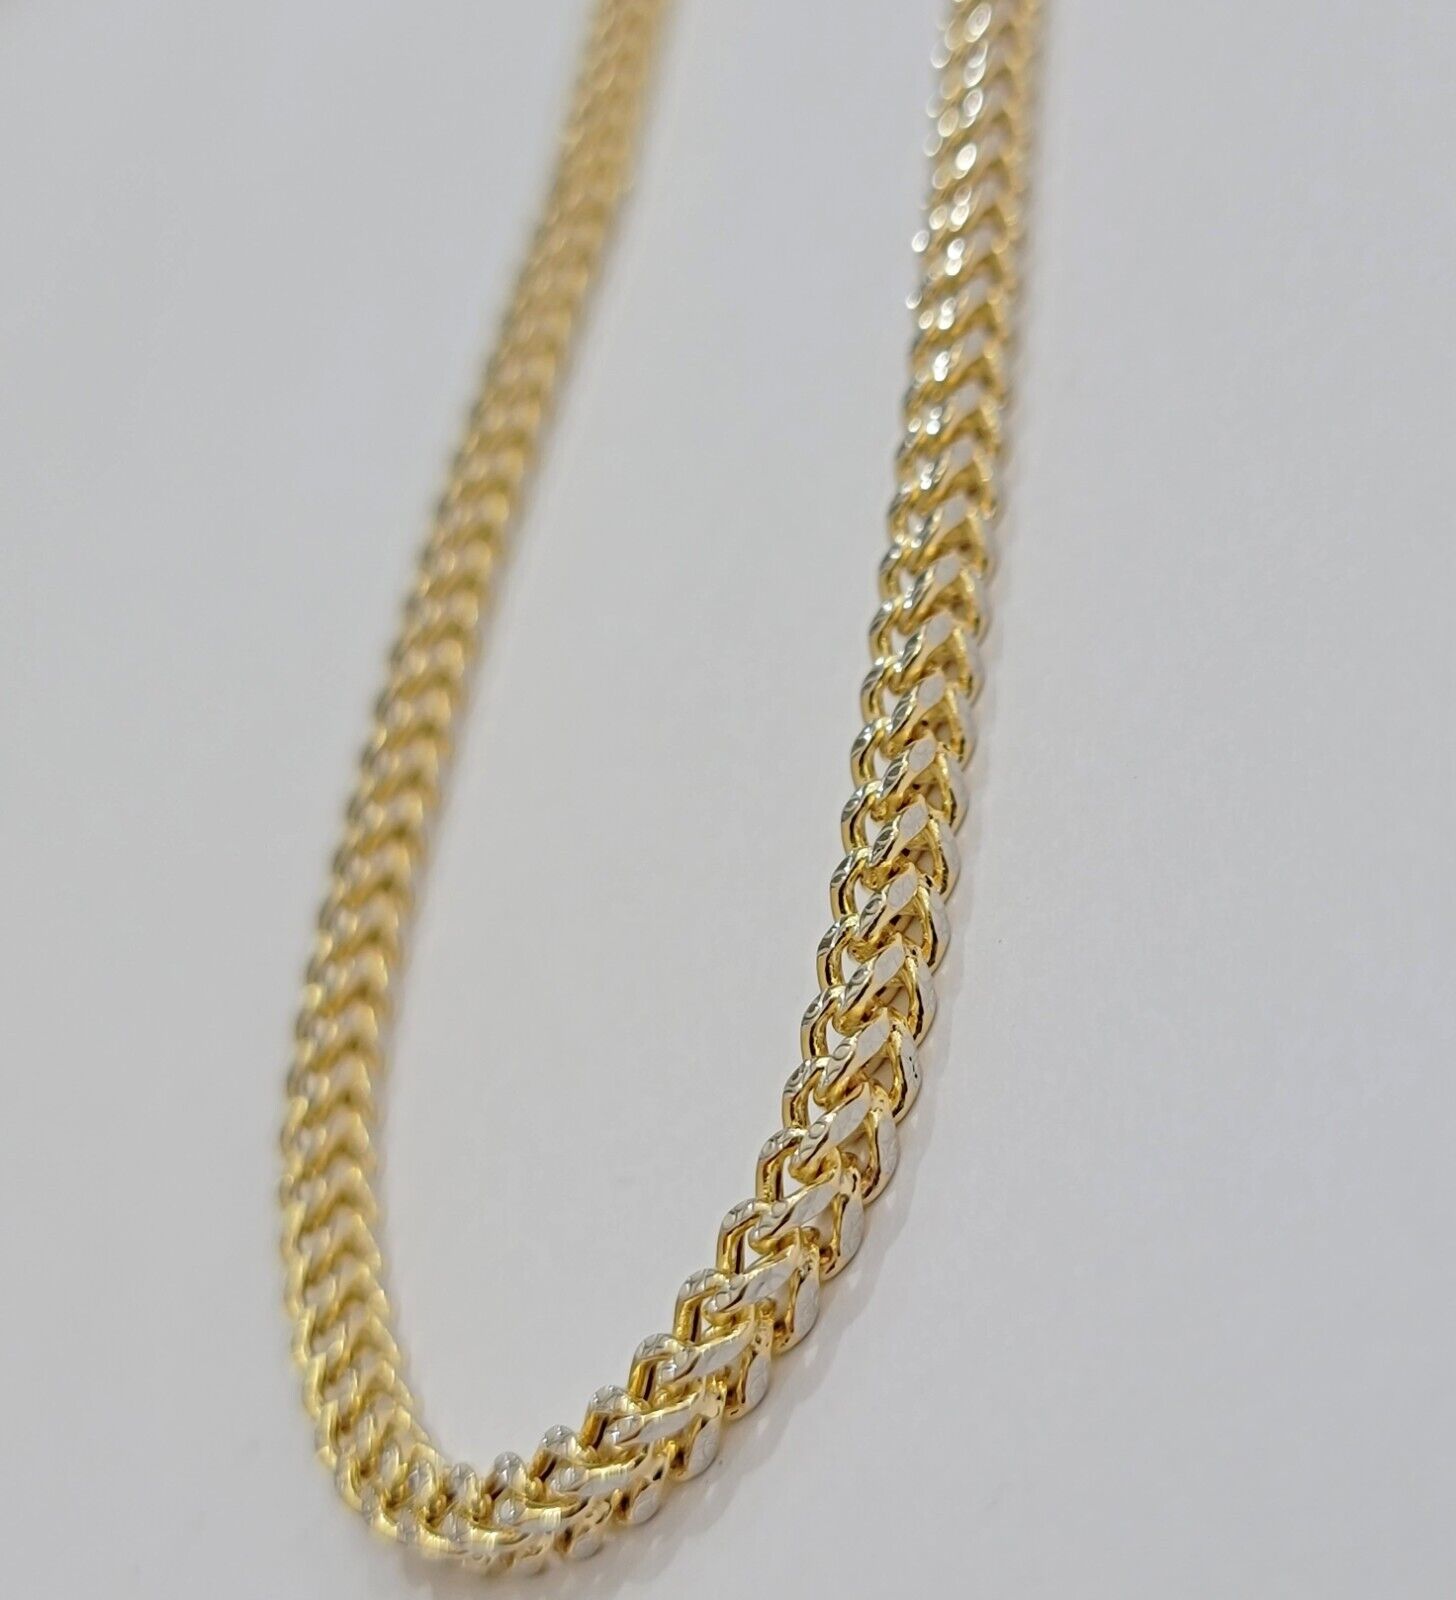 Real 14k Gold Chain Franco Necklace Diamond cuts 3.5mm 18